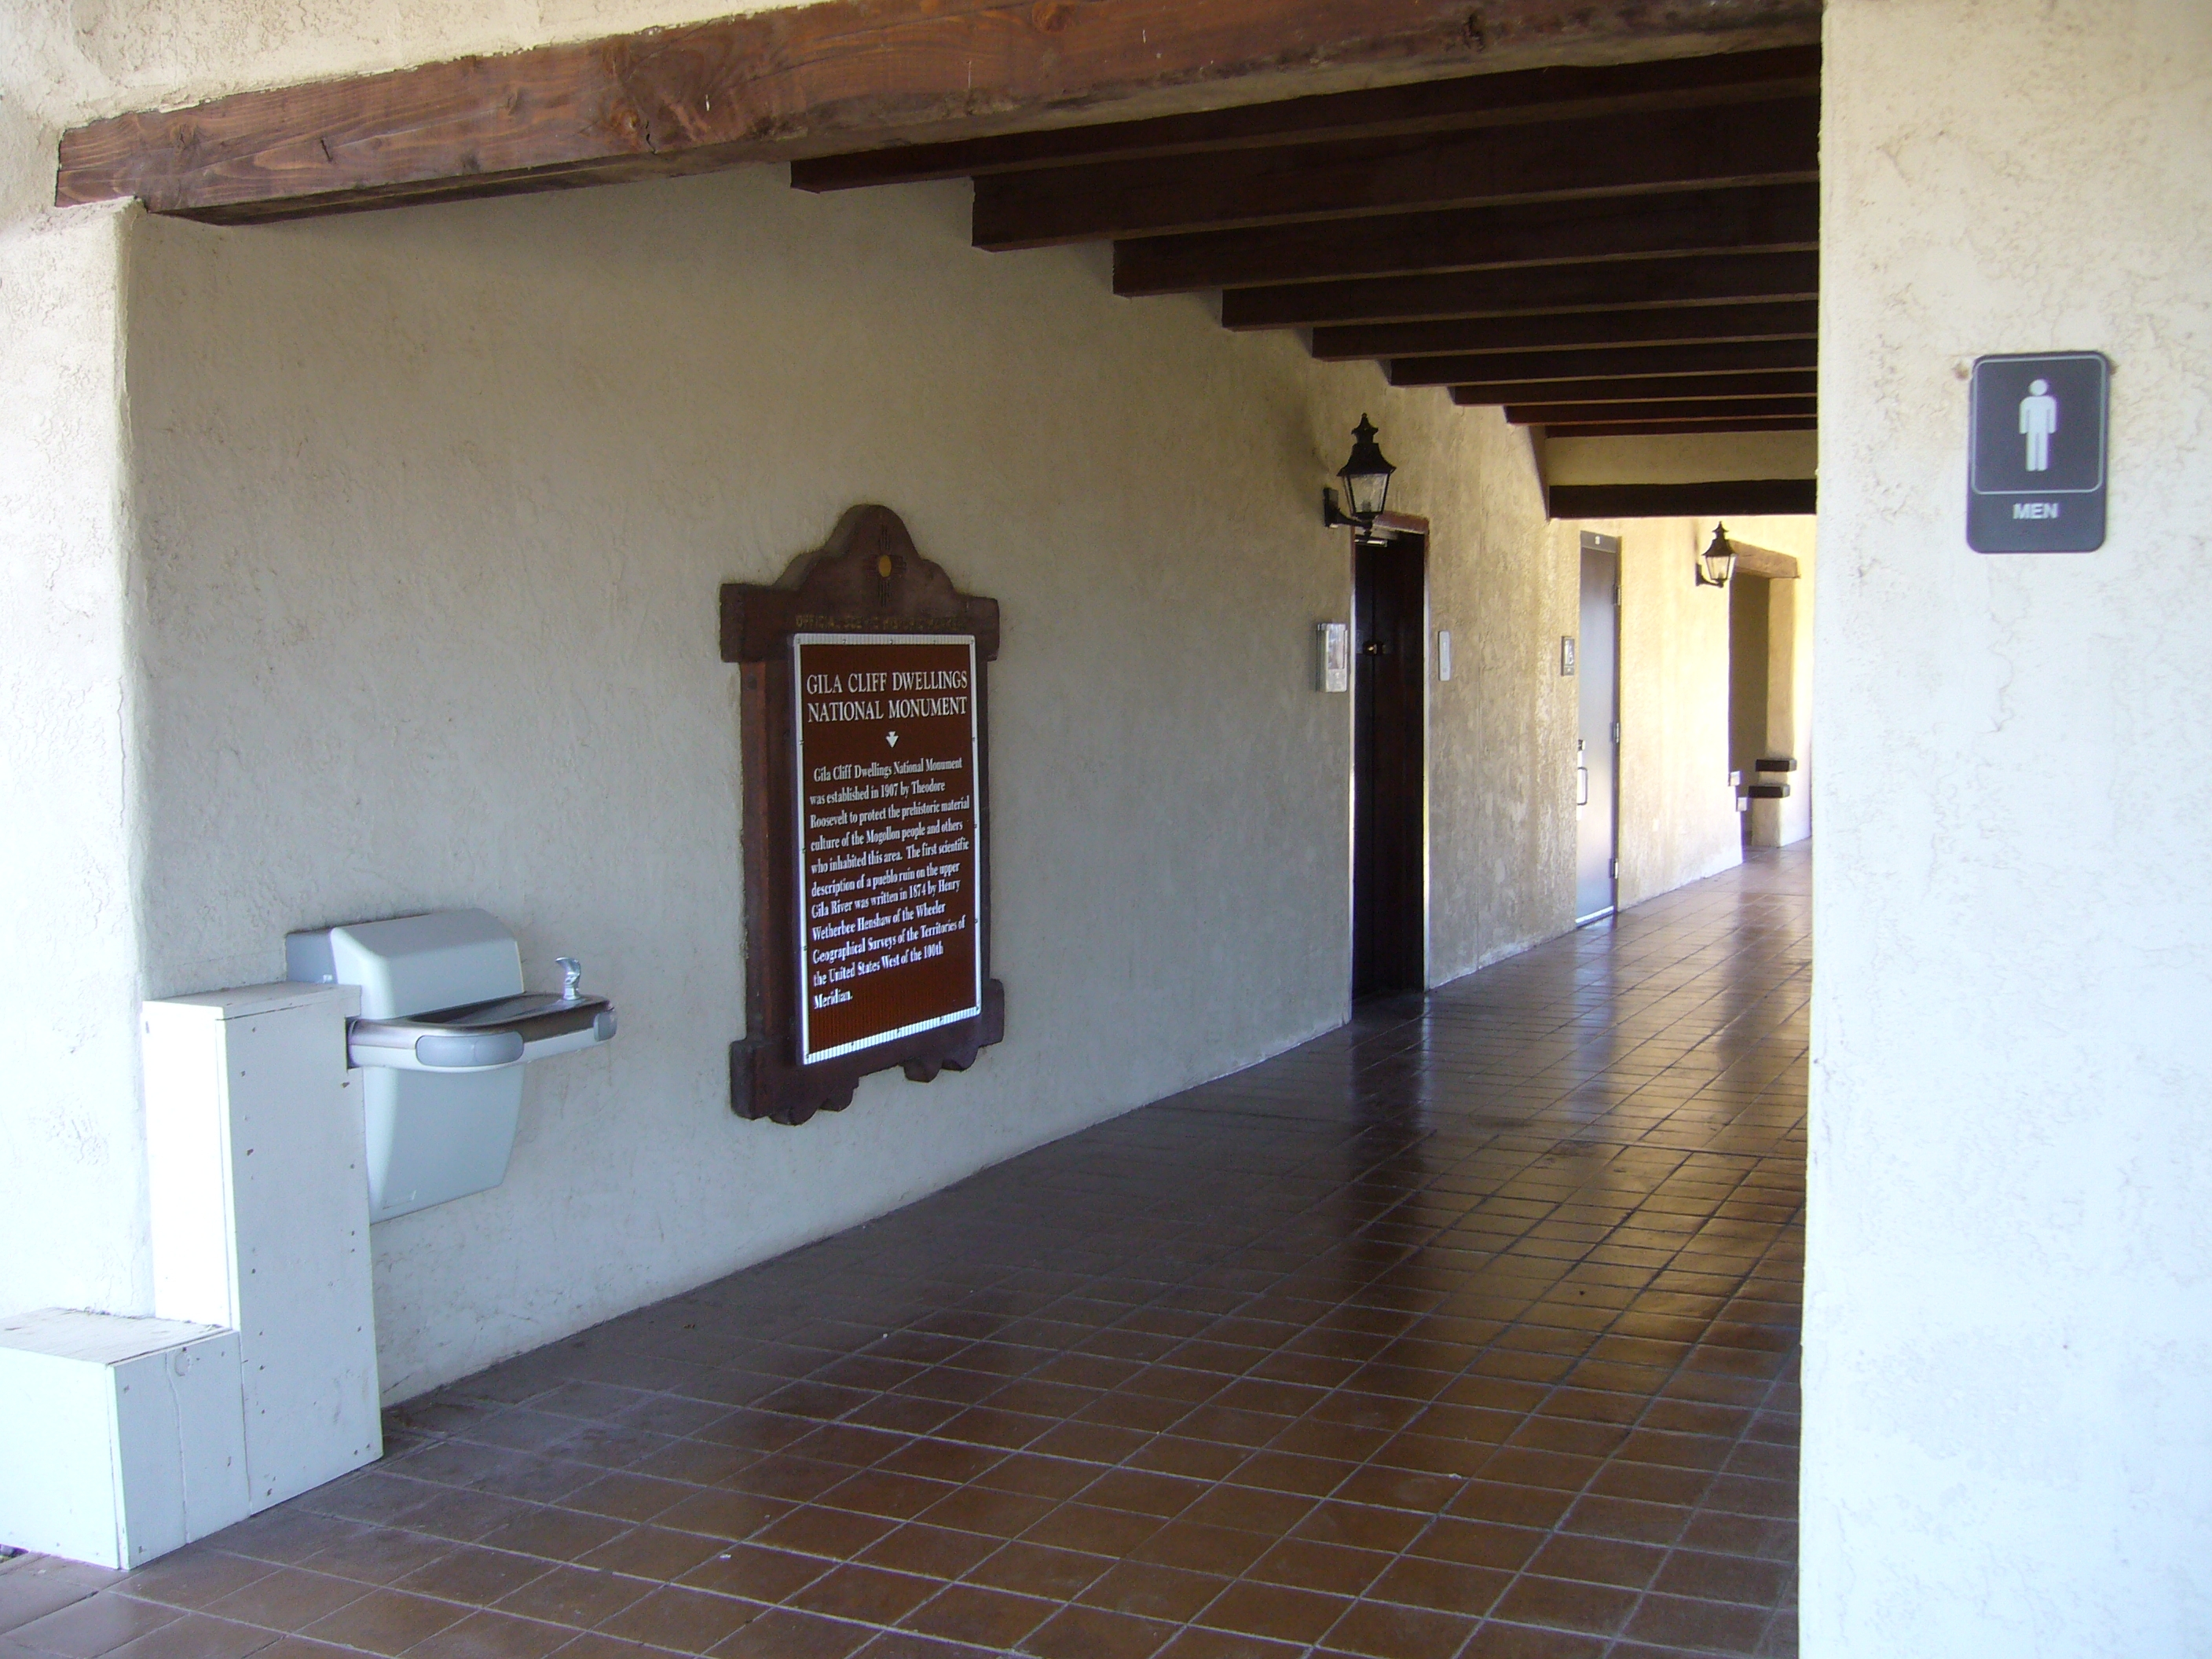 Gila Cliff Dwellings National Monument Marker